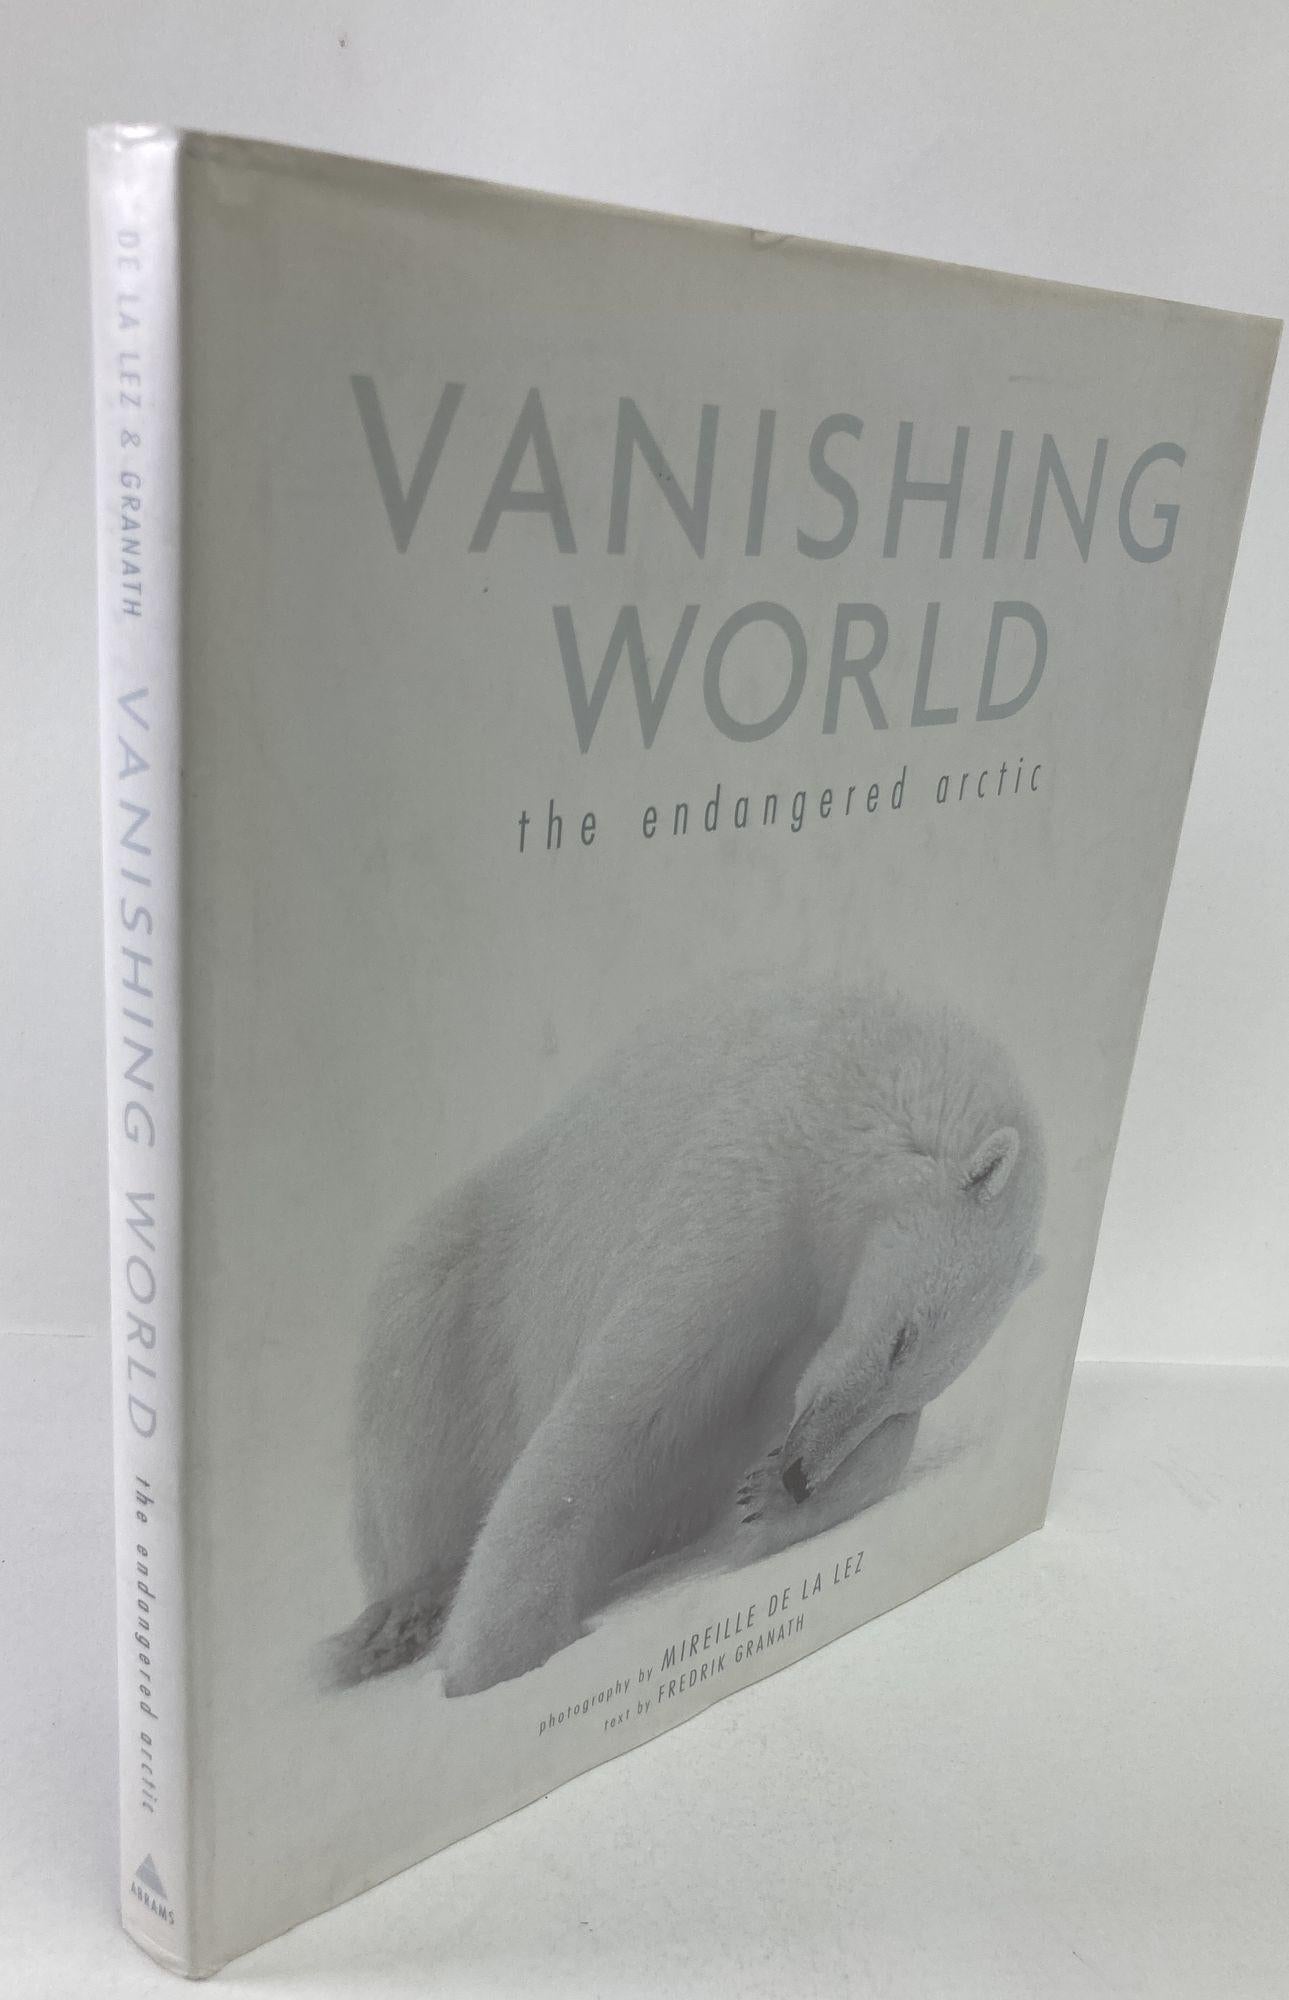 Vanishing World: The Endangered Arctic.
Fredrik Granath Harry N. Abrams, Nov 1, 2007 - Nature - 270 pages
A visual record of life in the Arctic, this book is both a celebration of the wildlife that inhabits this climate and a tale of global